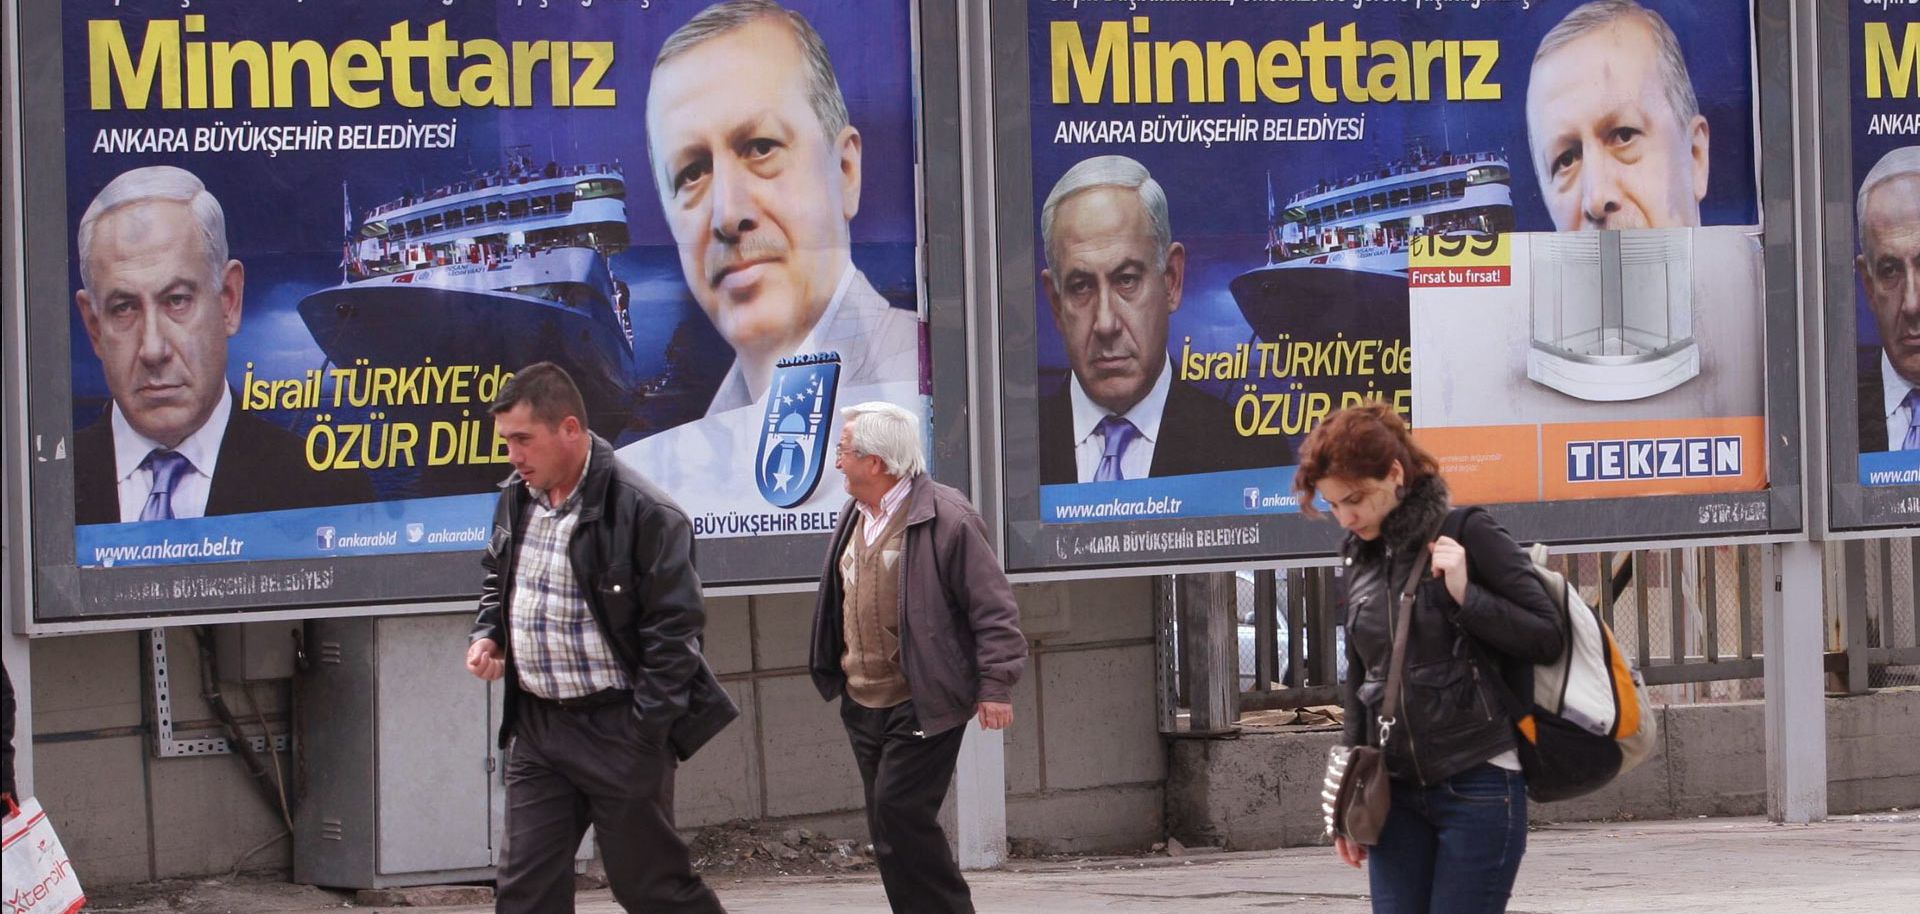 Turkey and Israel: An Inevitable Reconciliation